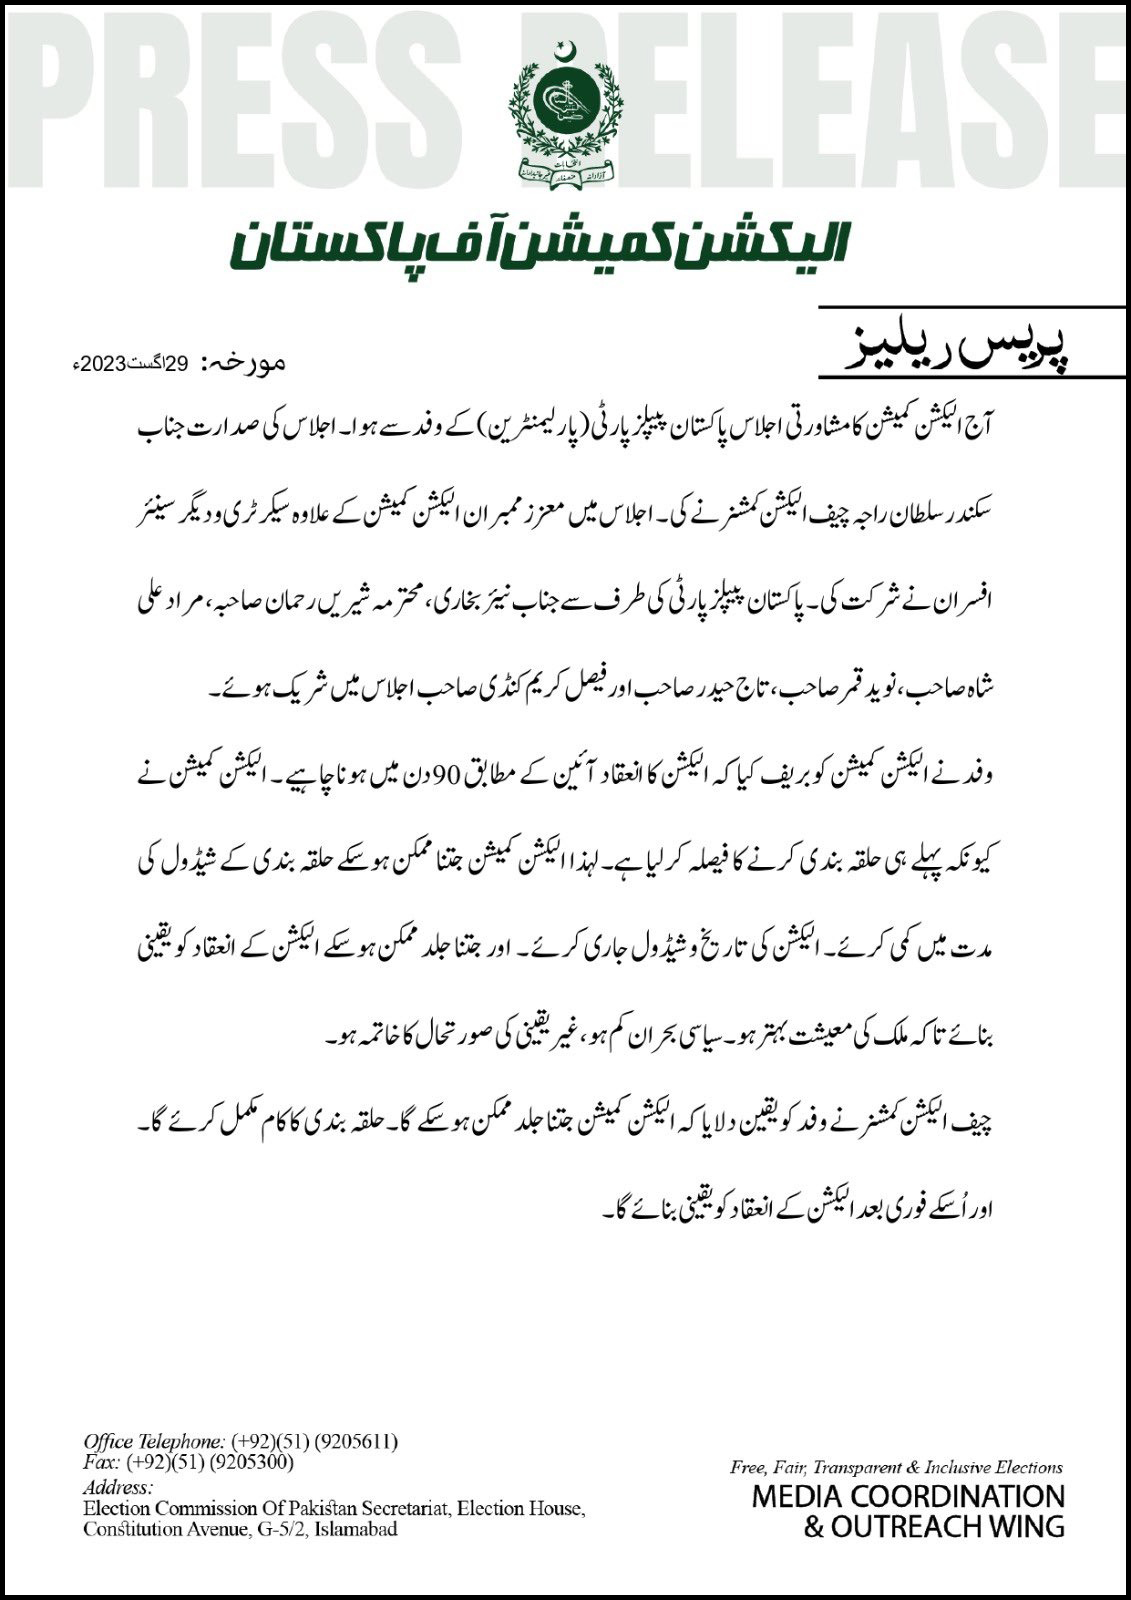 Statement of Election Commission